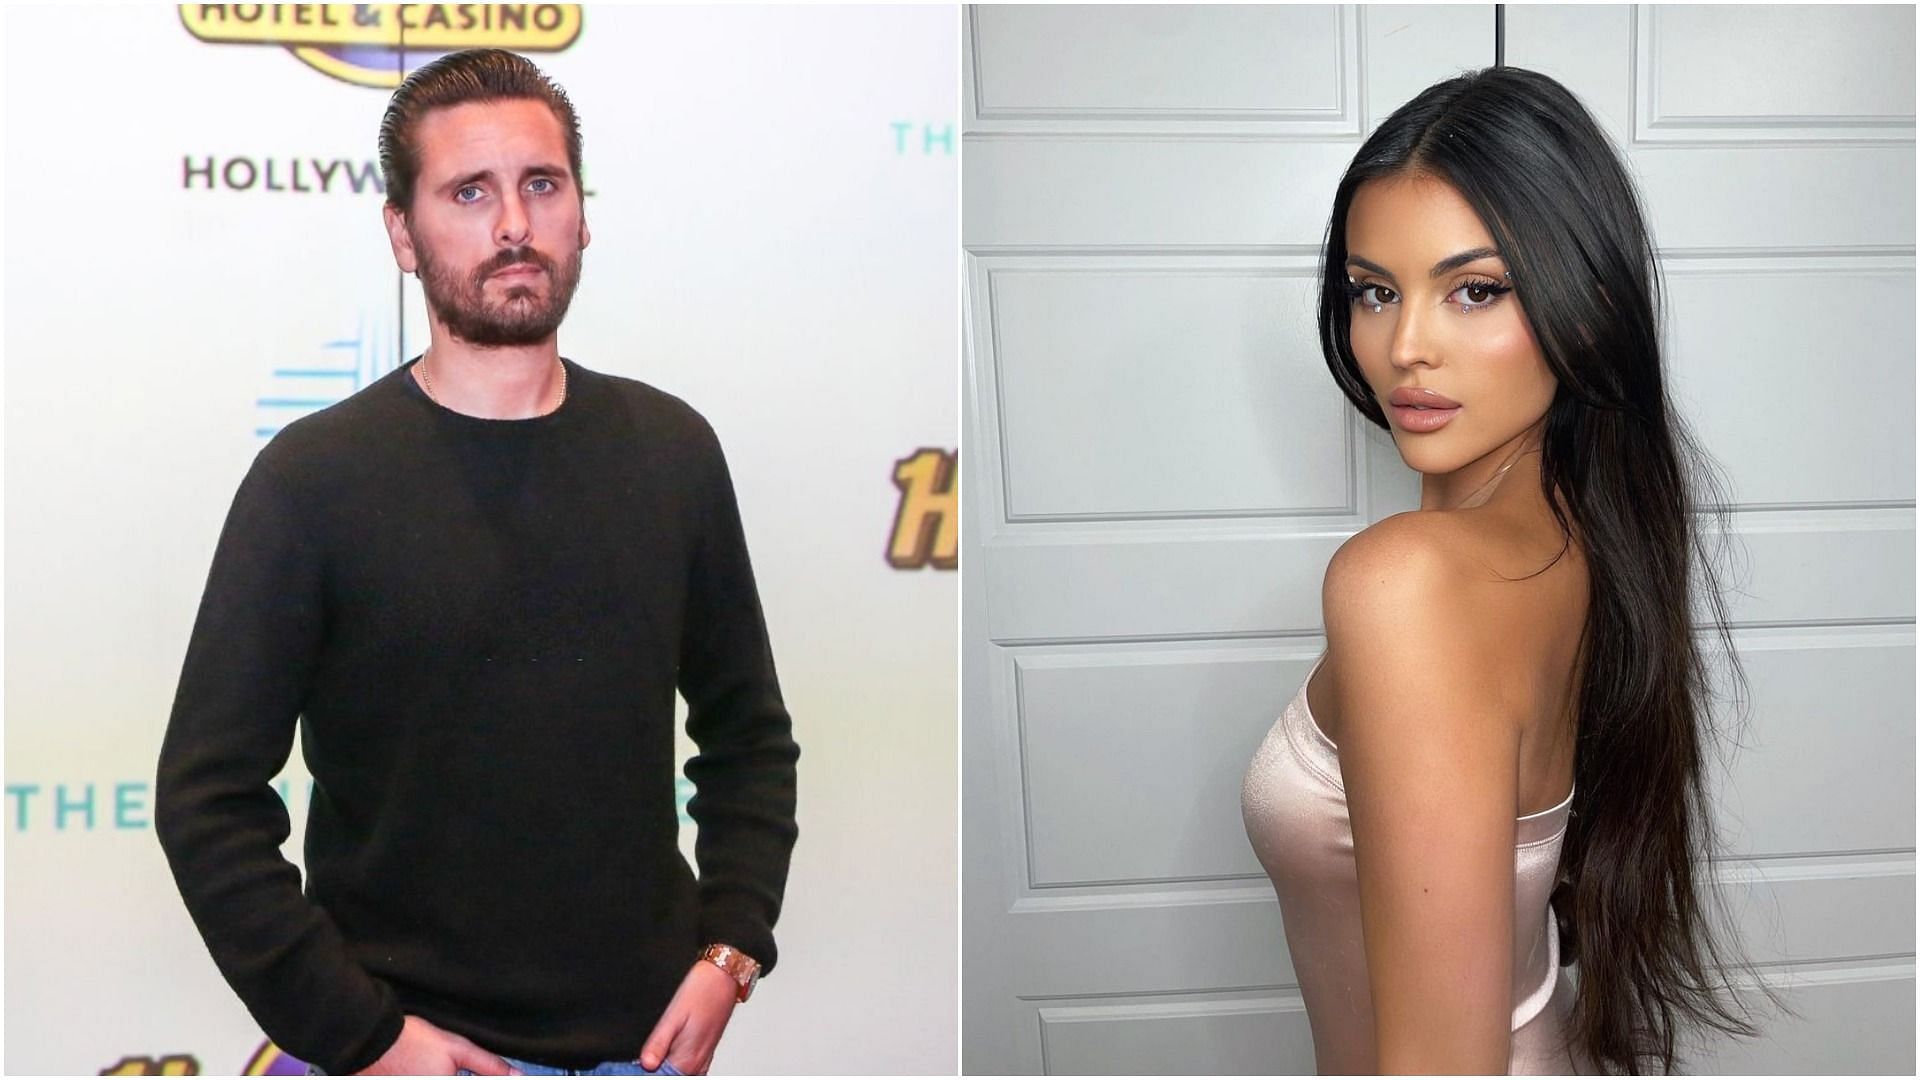 Scott Disick and Holly Scarfone were recently spotted together at dinner (Images via Zak Bennett/Getty Images and hollyscarfone/Instagram)